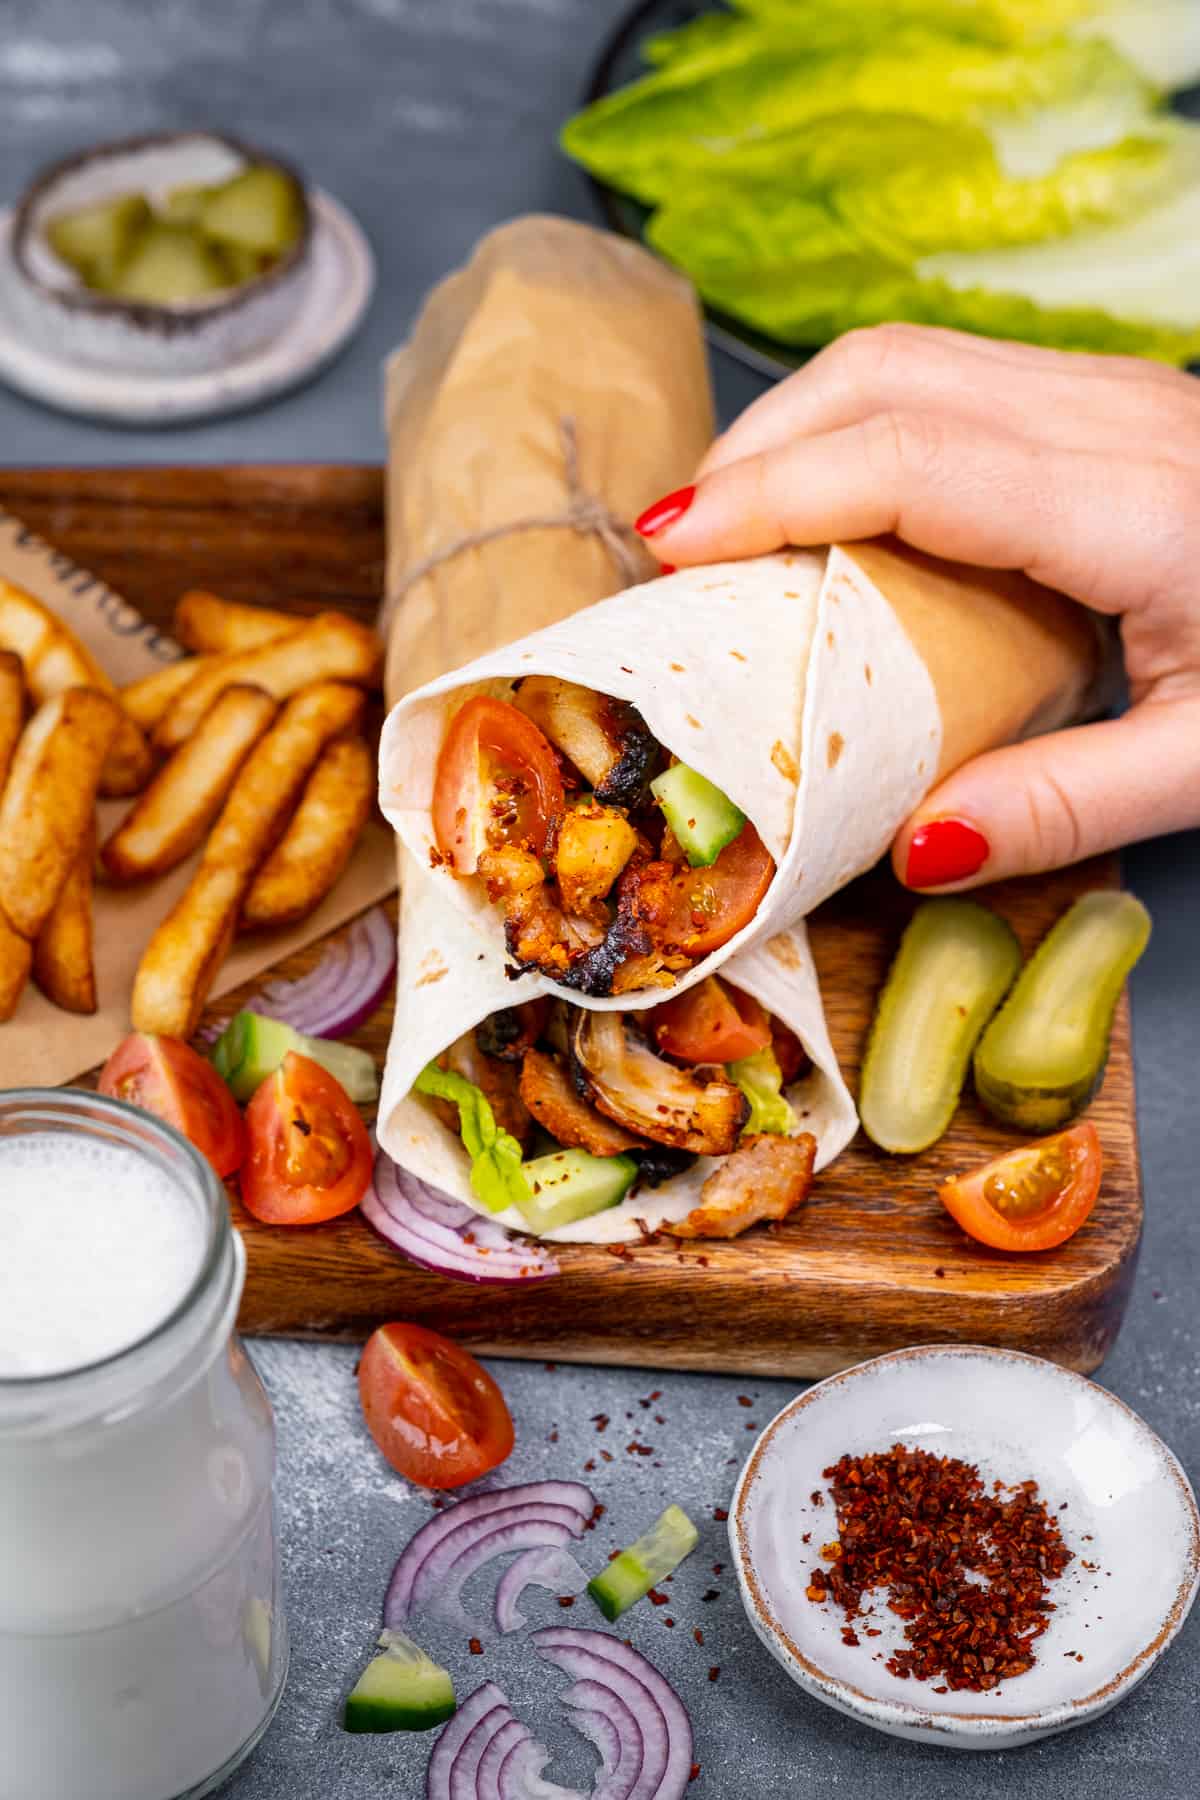 A hand taking a chicken doner wrap from a wooden board loaded with chips, pickles, tomatoes and onions.